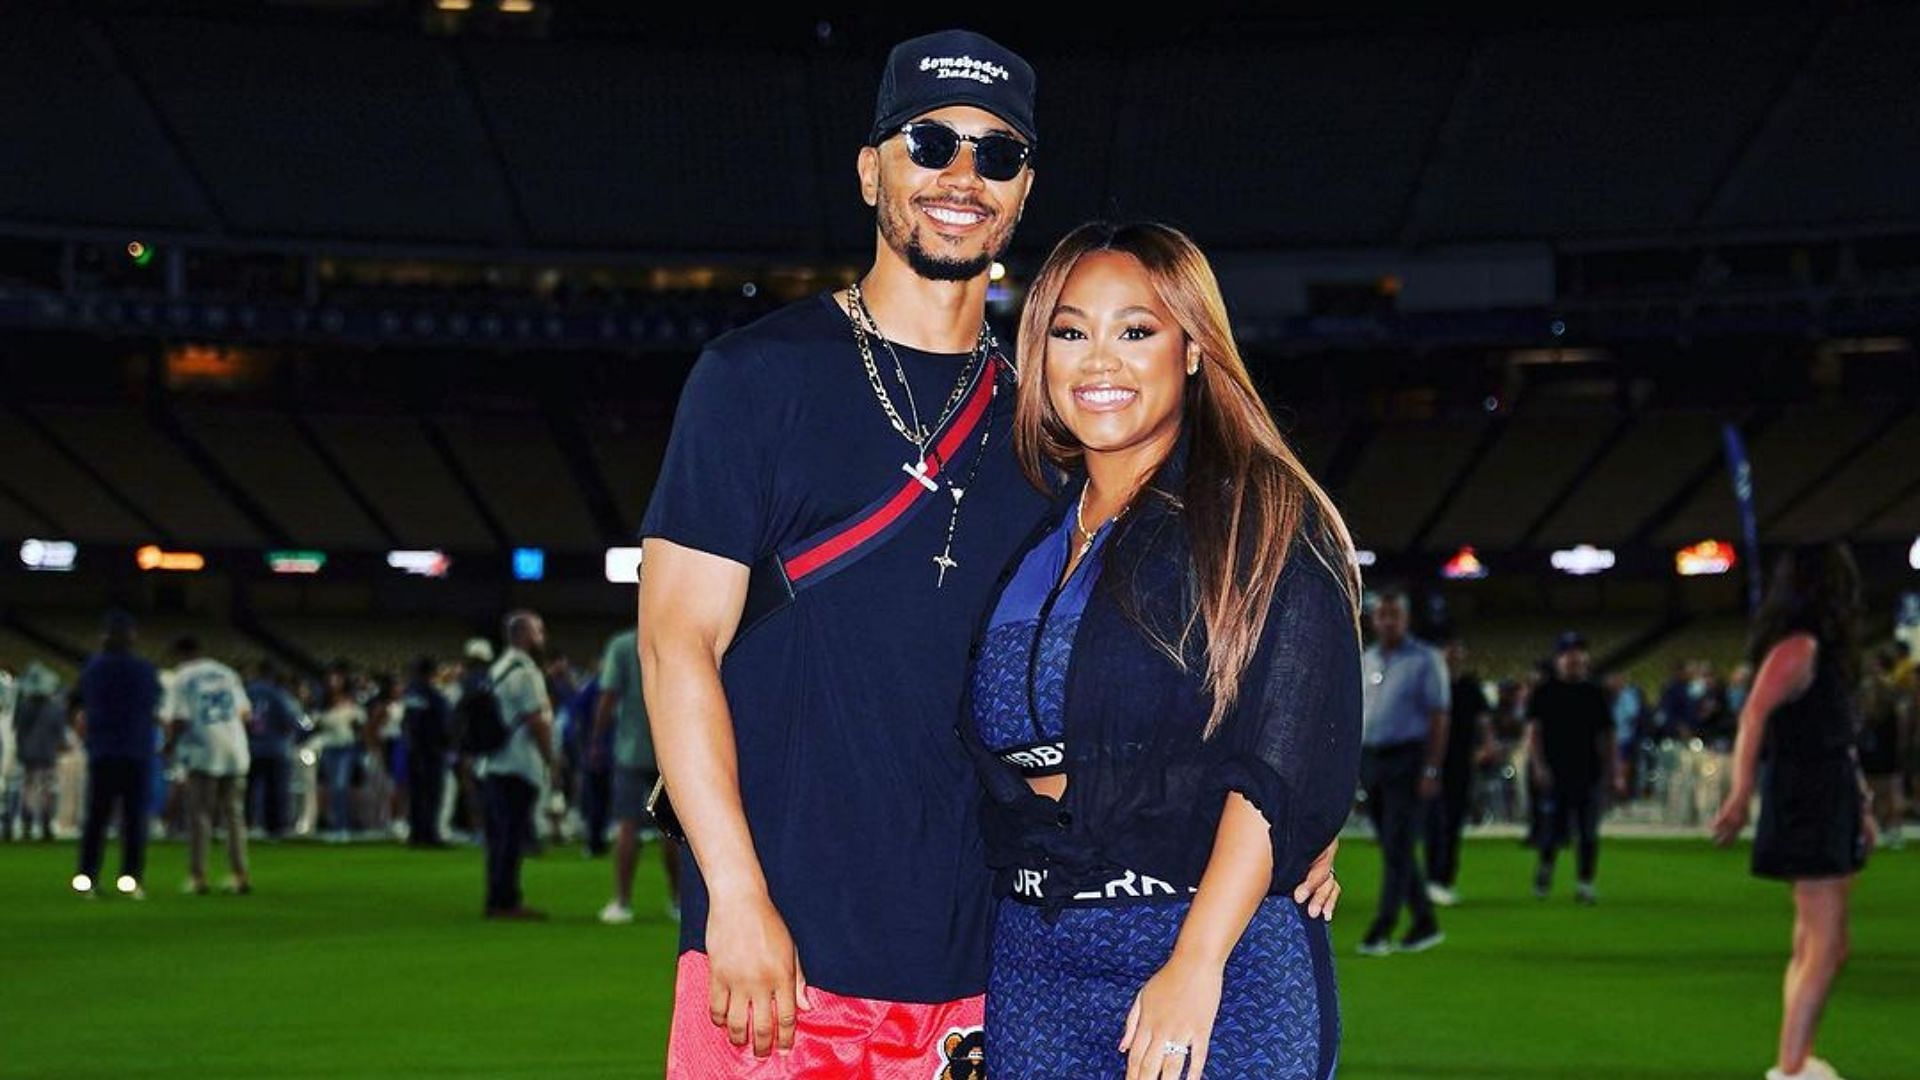 Mookie Betts and his wife Brianna empower LA students at Dodger Stadium financial literacy workshop